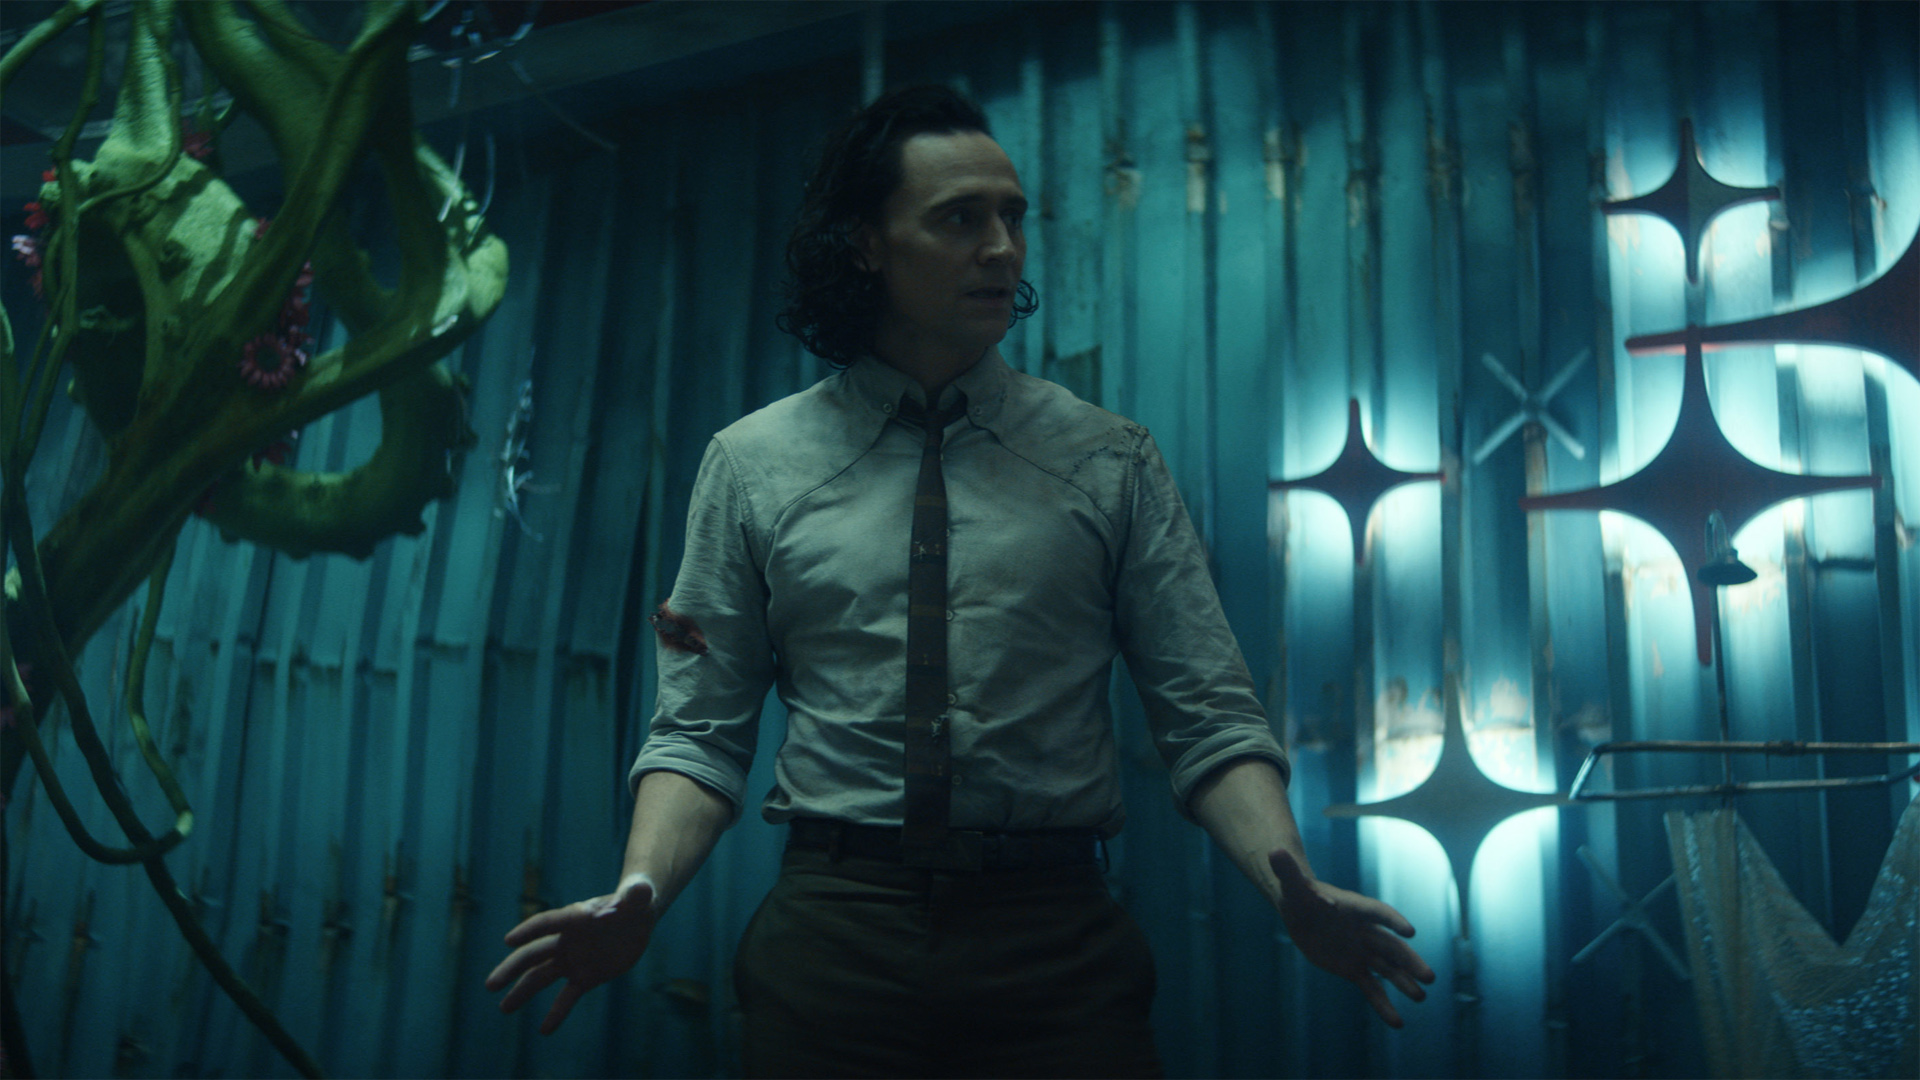 Tom Hiddleston as Loki, standing in a dark room wearing a shirt and tie